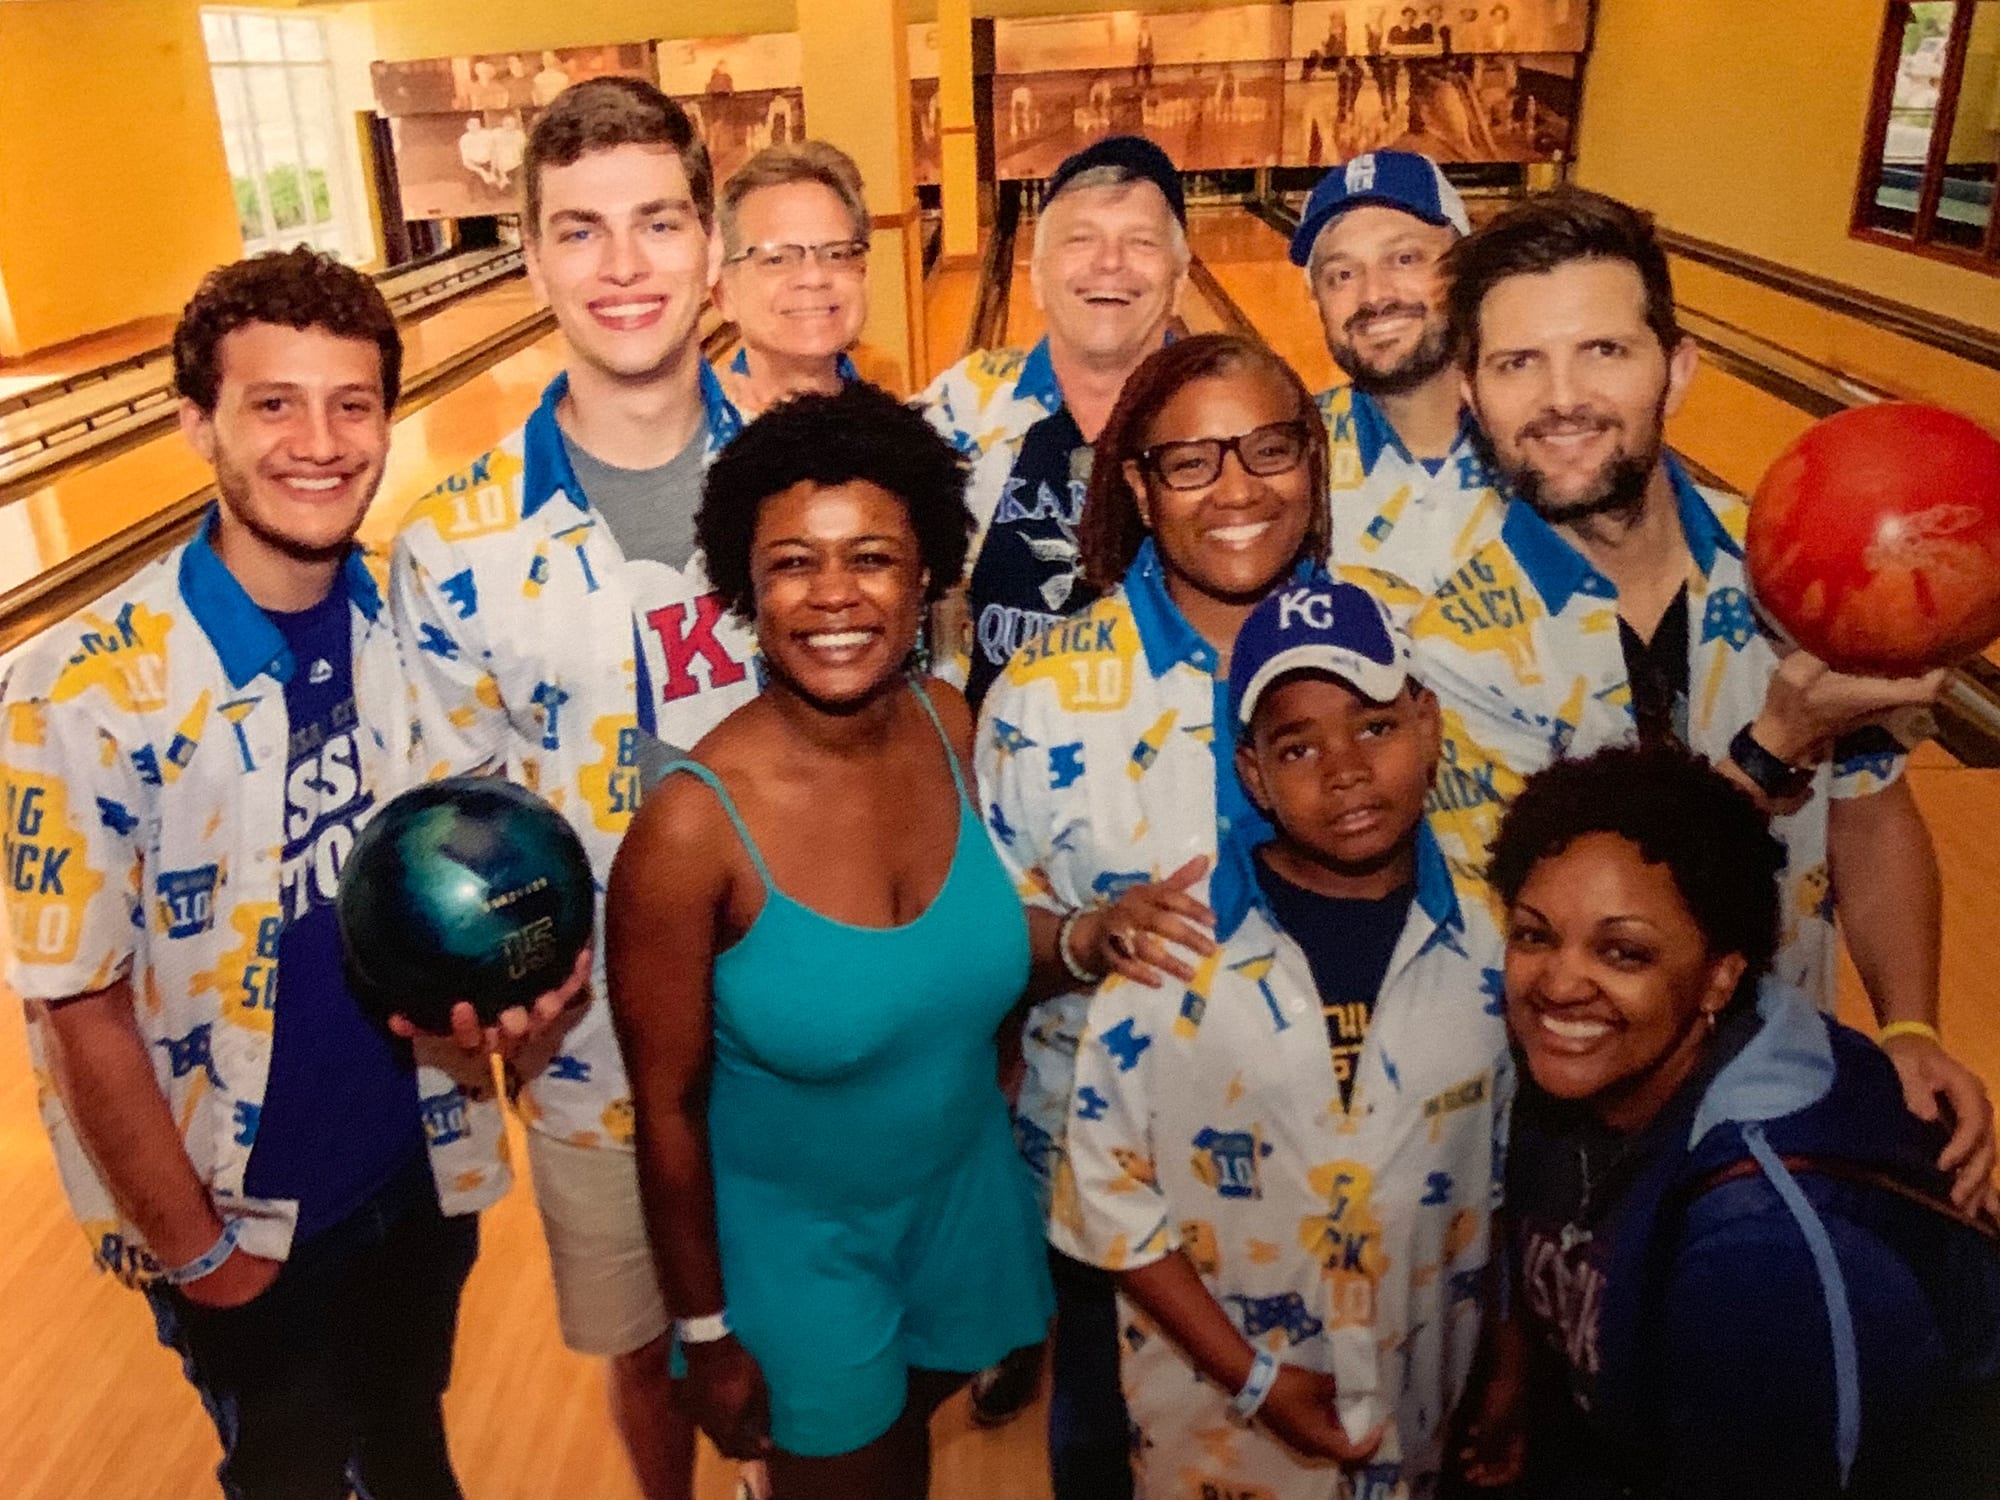 RDM founding members Kurt Rasmussen, Clay Dickey, and their families bowling with actor Adam Scott during the Big Slick Celebrity Weekend.